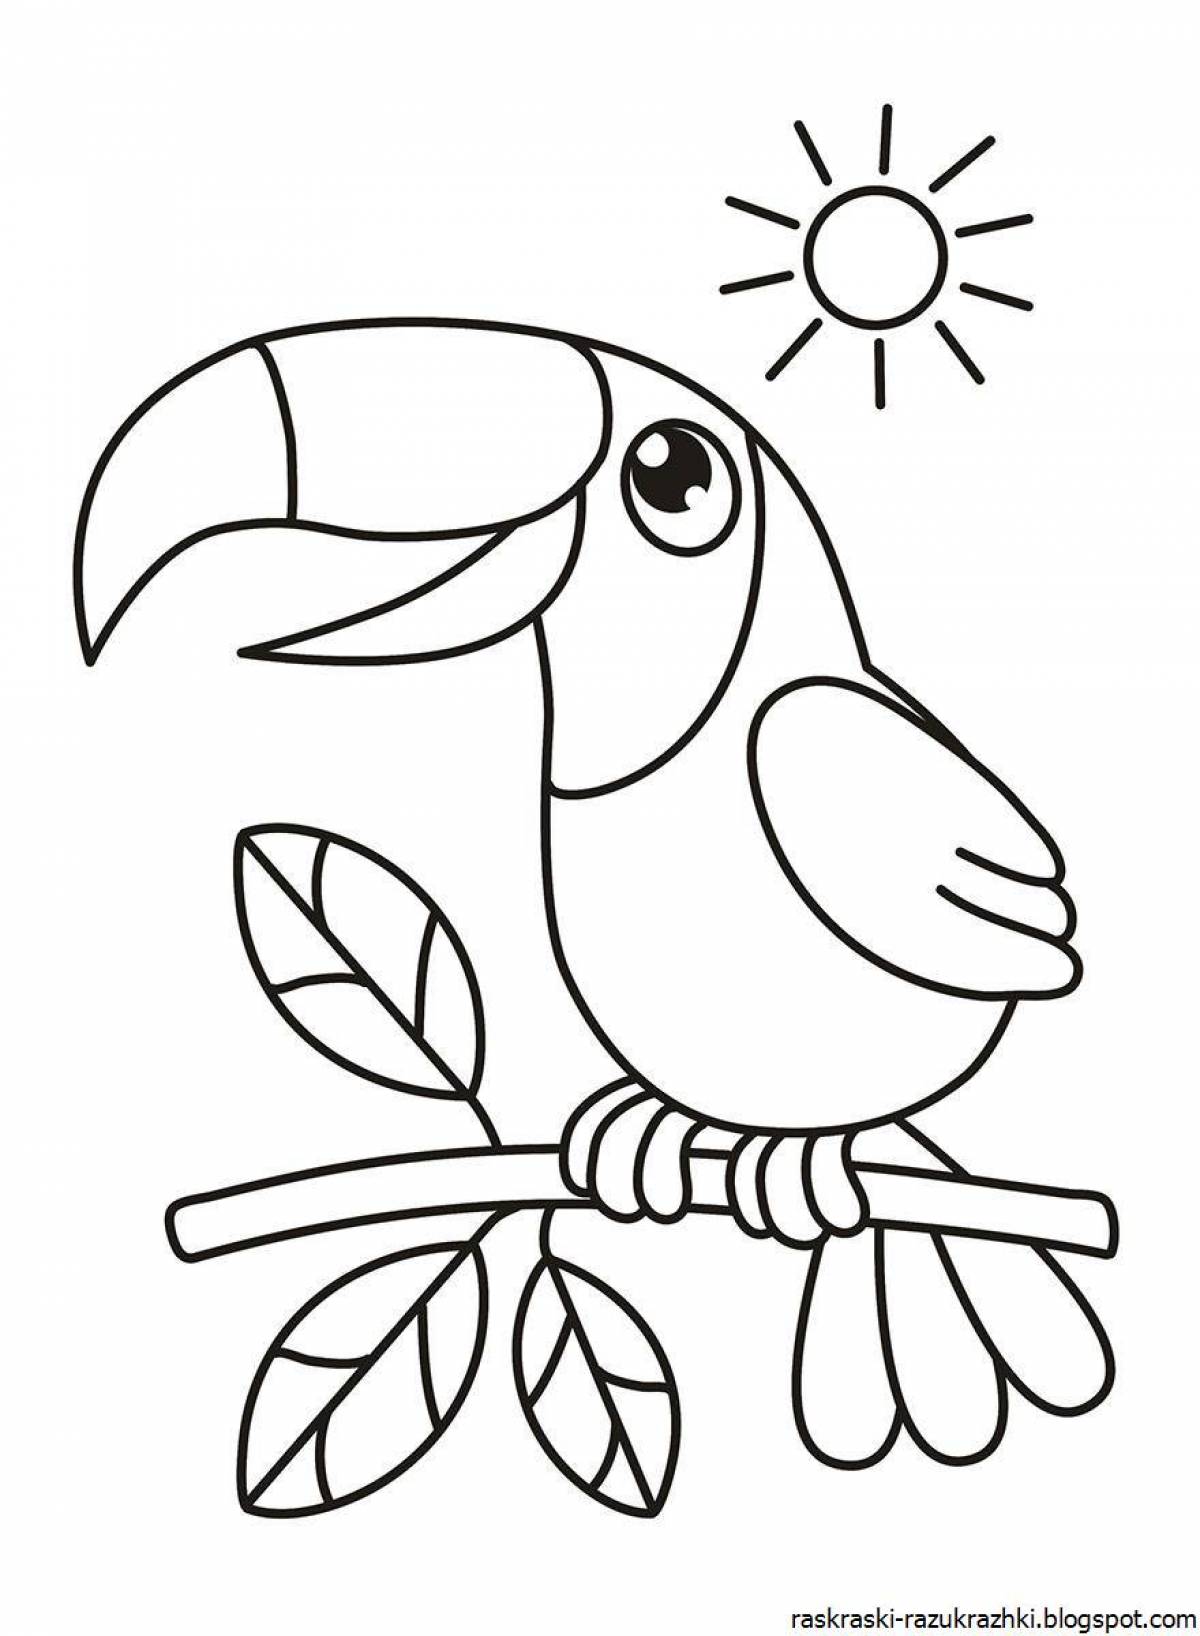 Sparkling bird coloring pages for kids